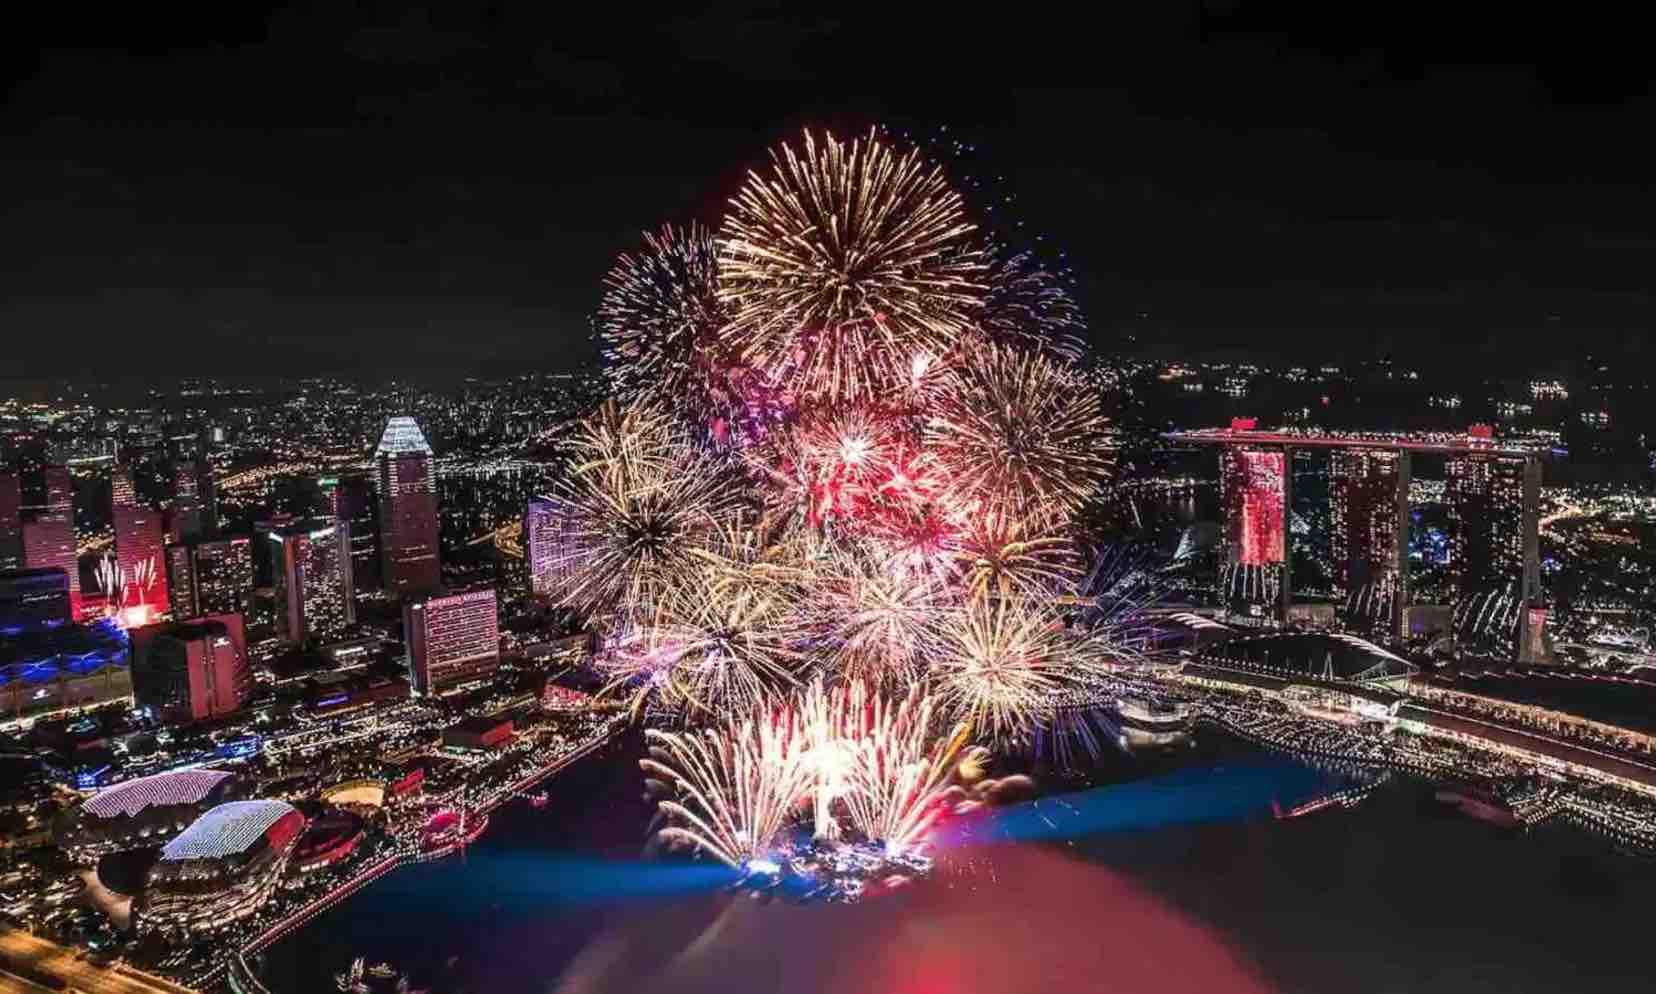 How To Watch National Day Parade Fireworks For Free In Singapore